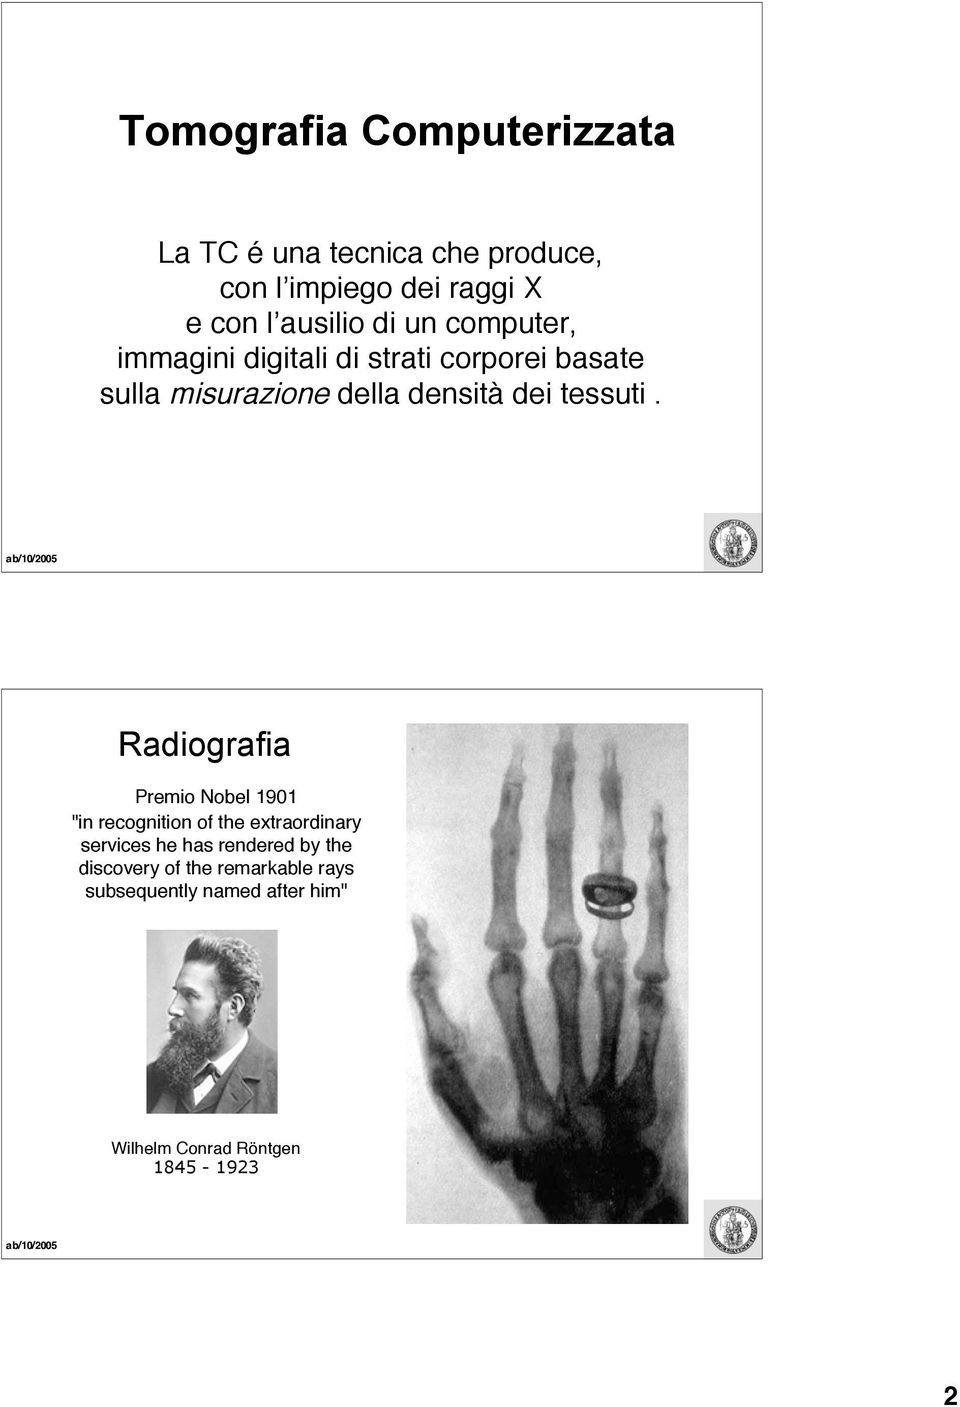 ab/10/2005 Radiografia Premio Nobel 1901 "in recognition of the extraordinary services he has rendered by